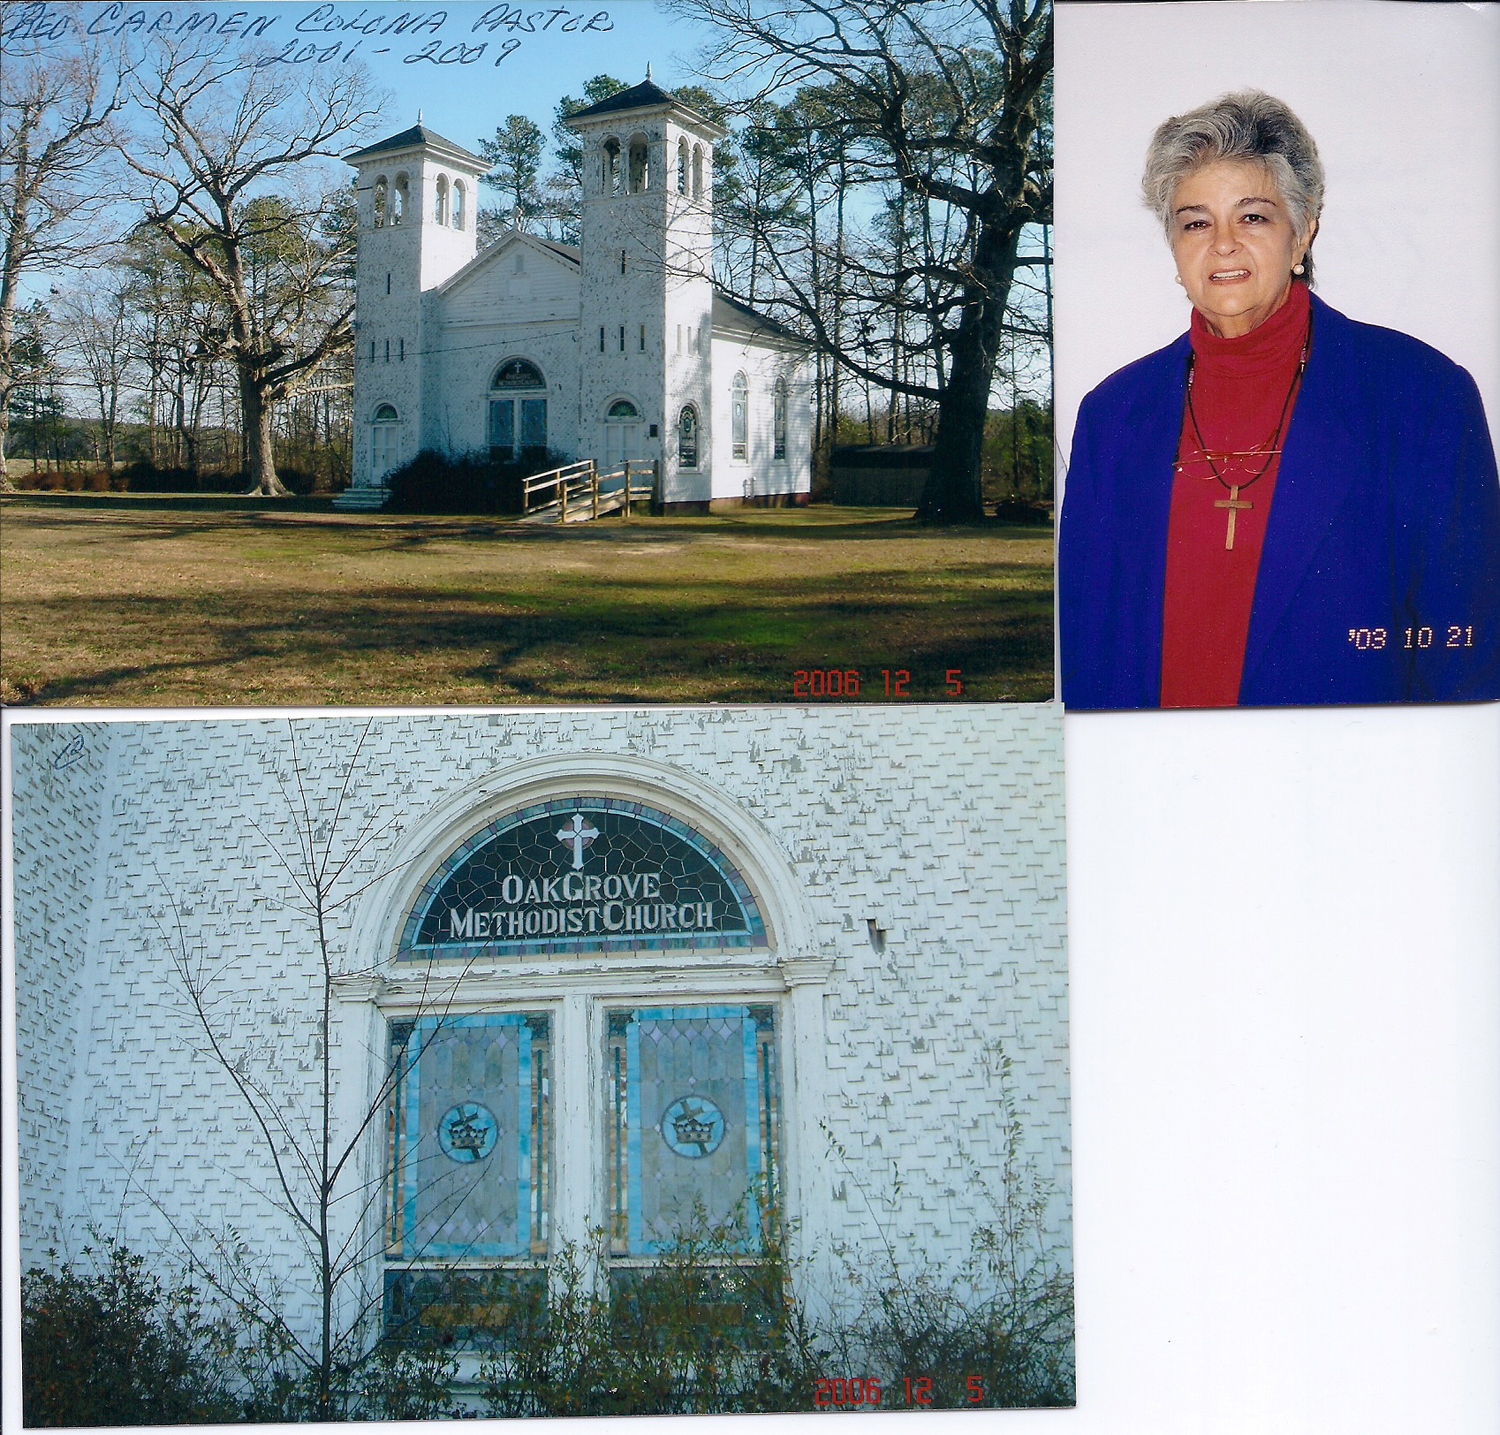 carmen_and_church_whjere_she_officiated_as_pastor_2009